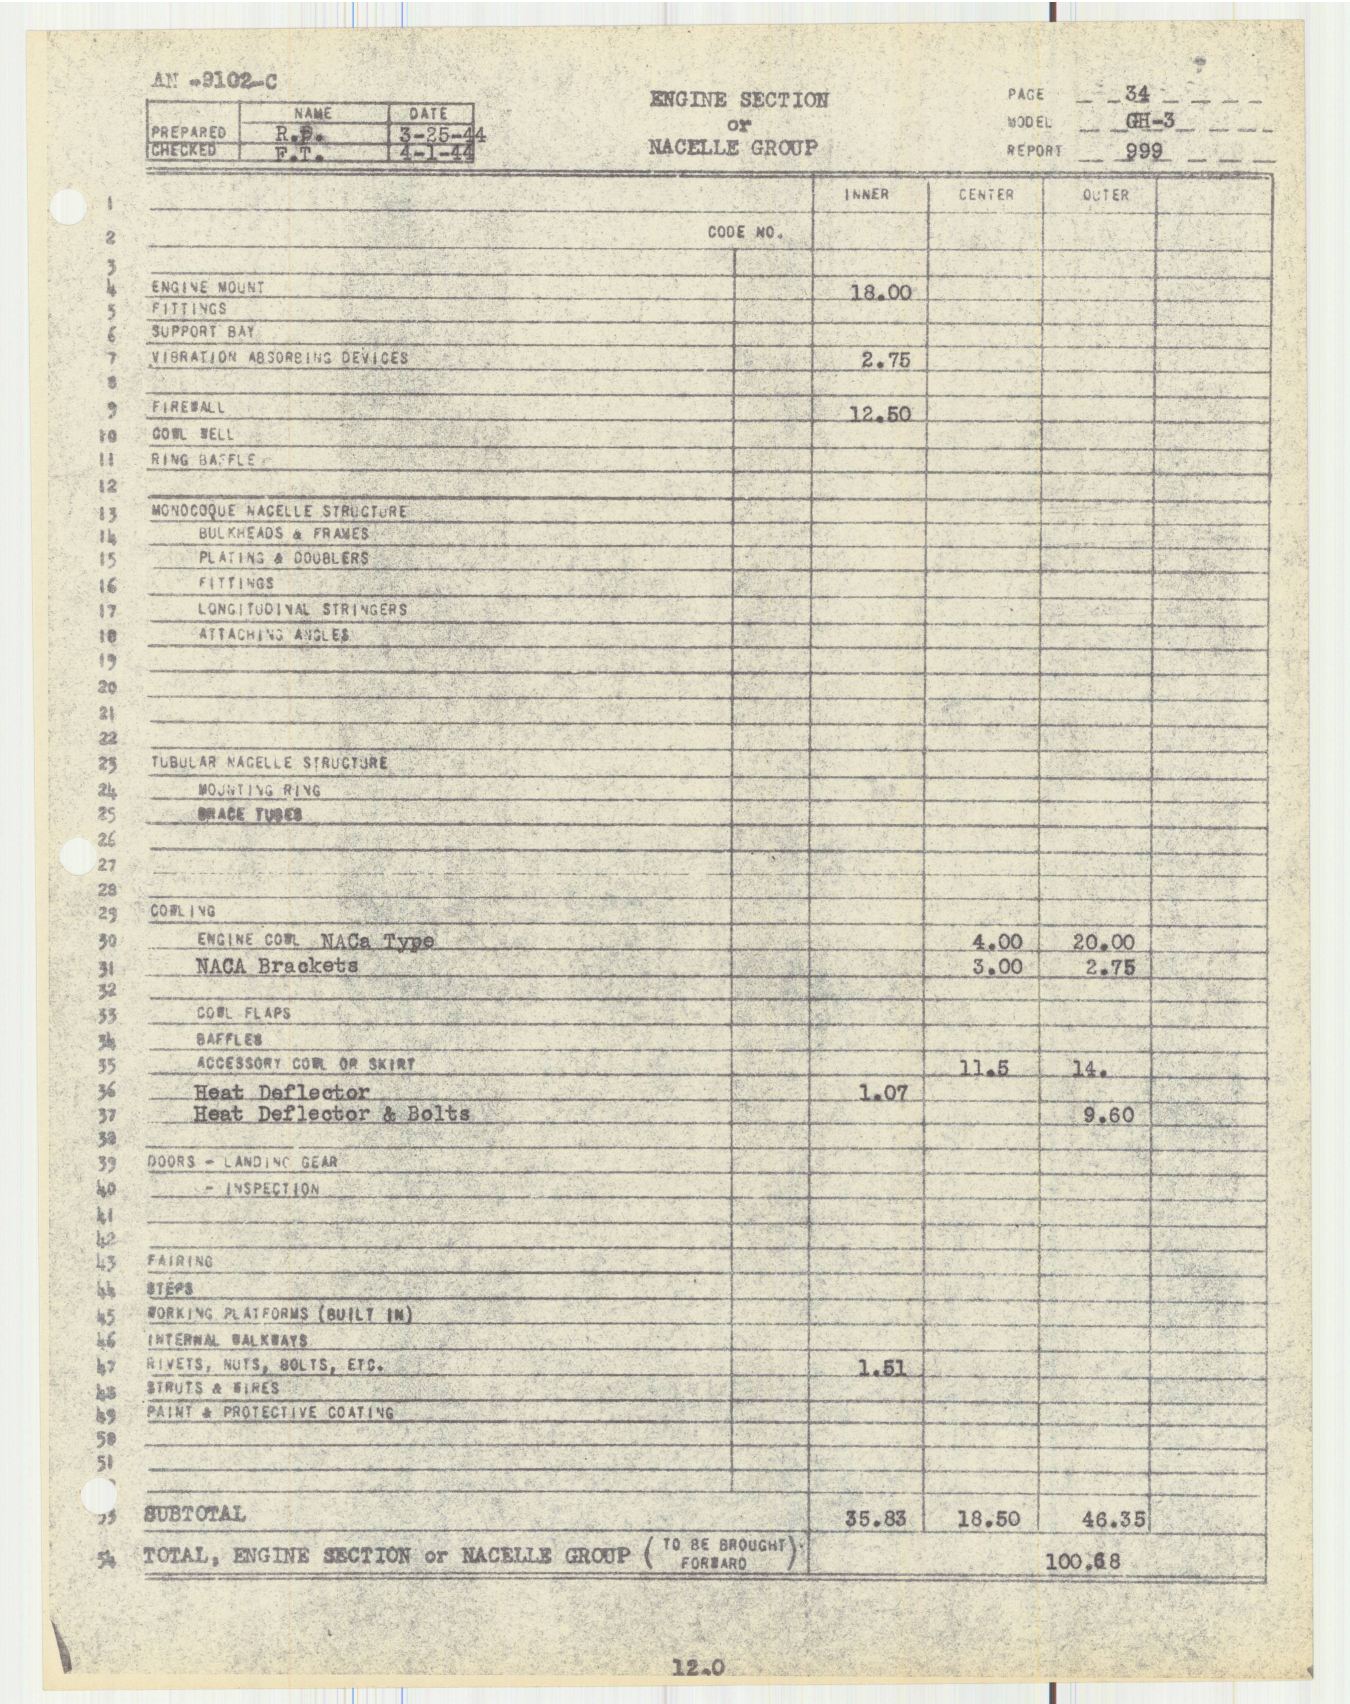 Sample page 37 from AirCorps Library document: Report 999, Weight and Balance, GH-3 999